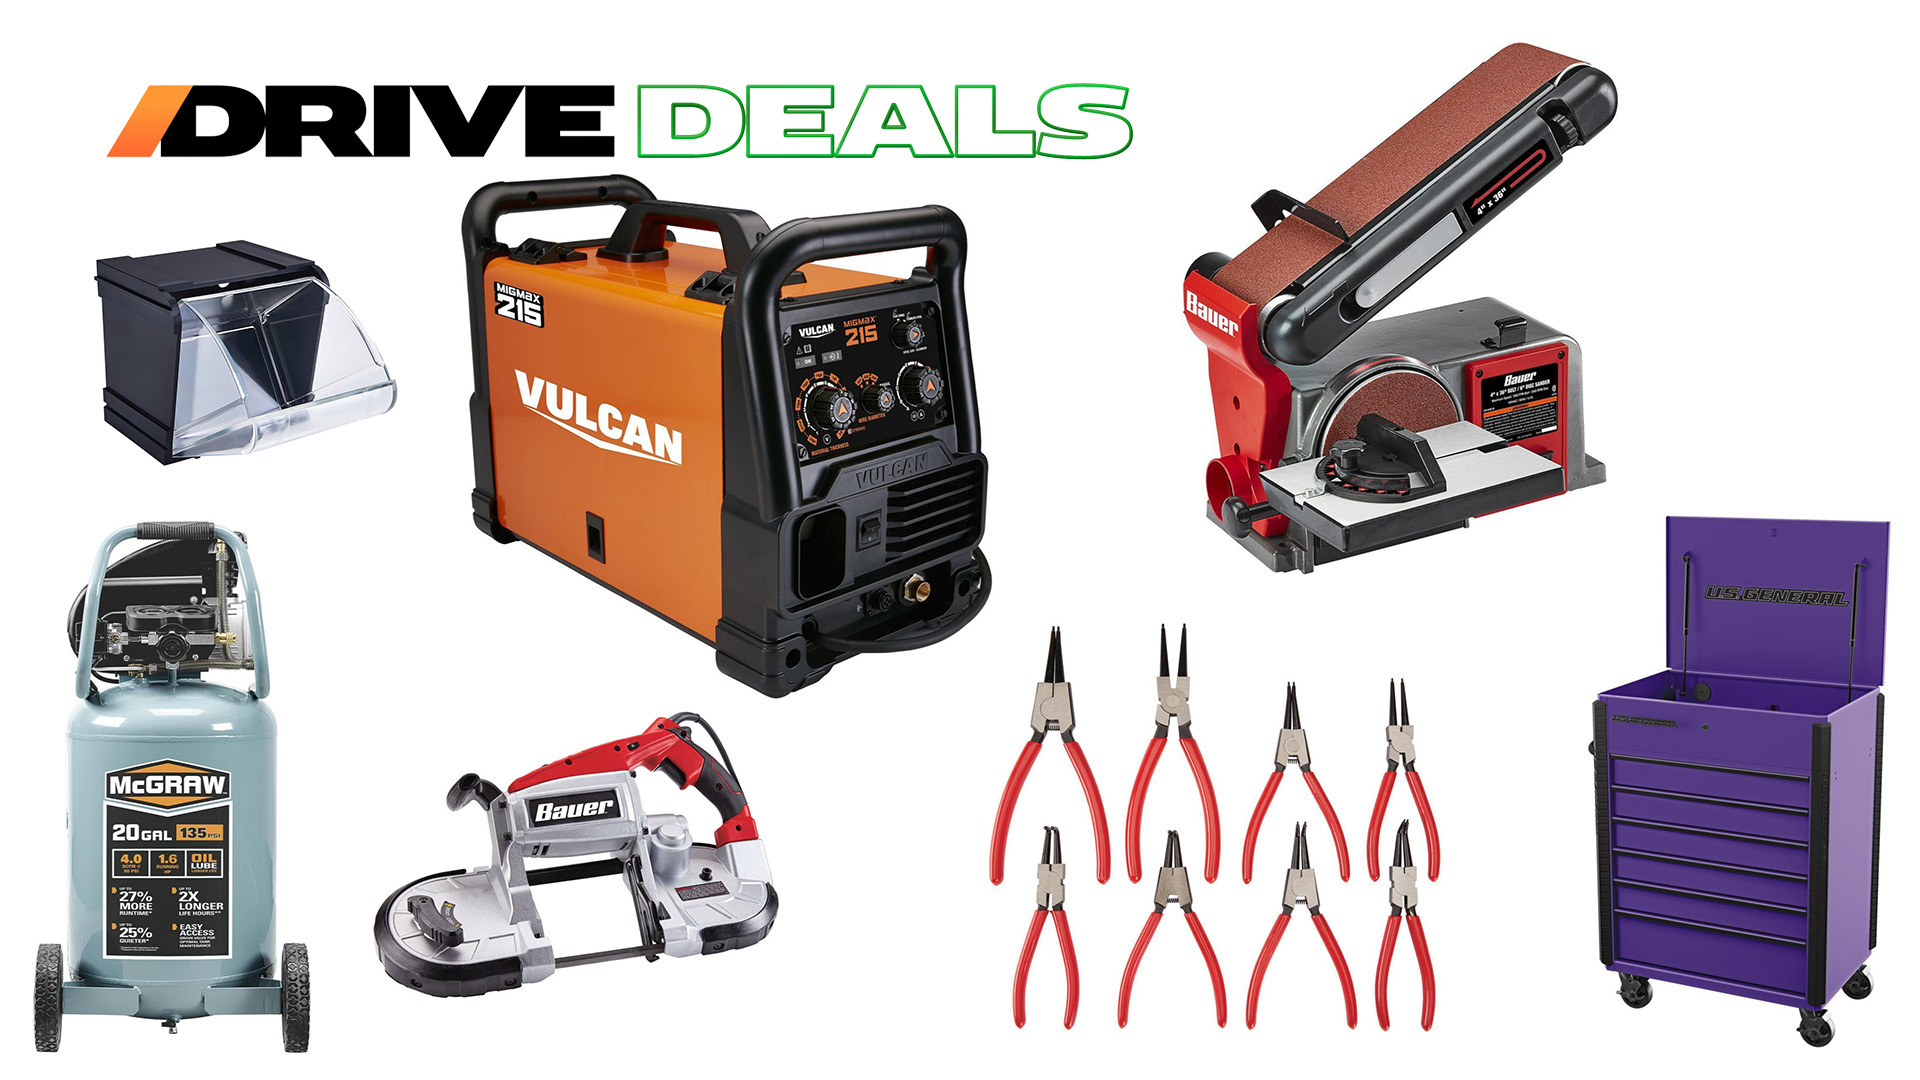 Harbor Freight Deals On Everything From Power Tools, To Welders, And Even Storage Solutions